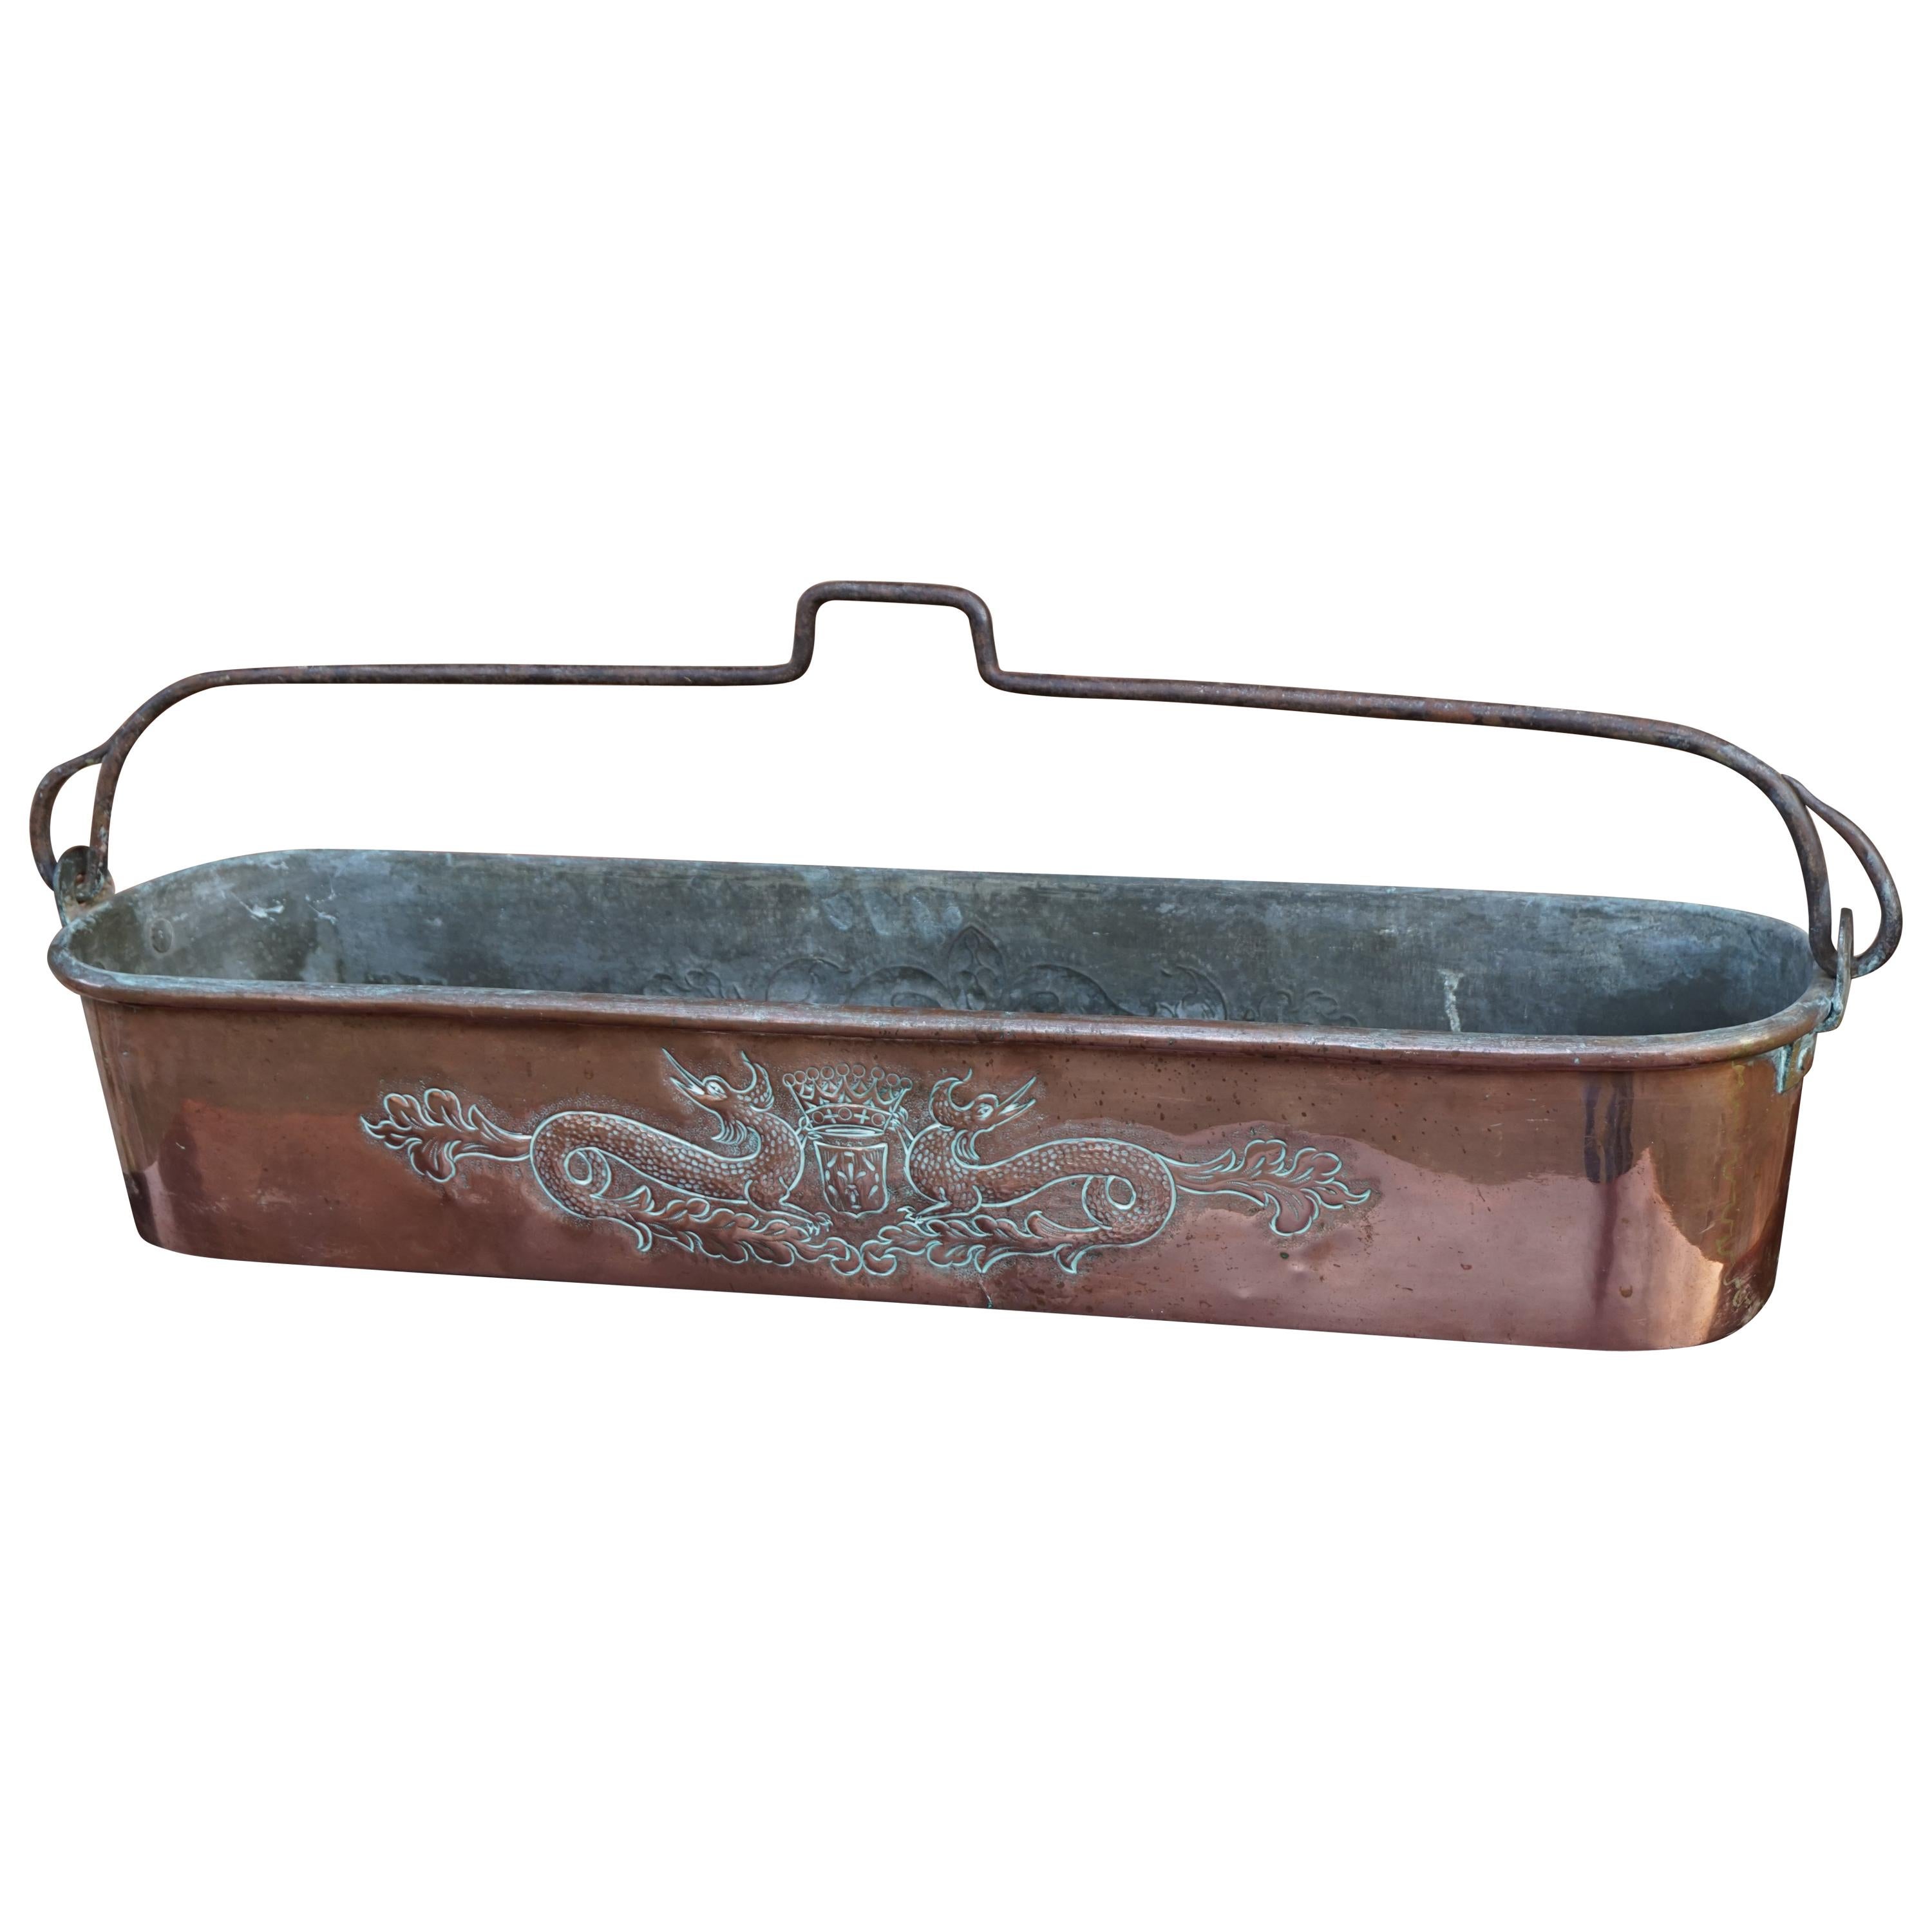 Unique Handcrafted Antique Copper Kitchen Pan for Cooking Fish, Eal, Pike Etc